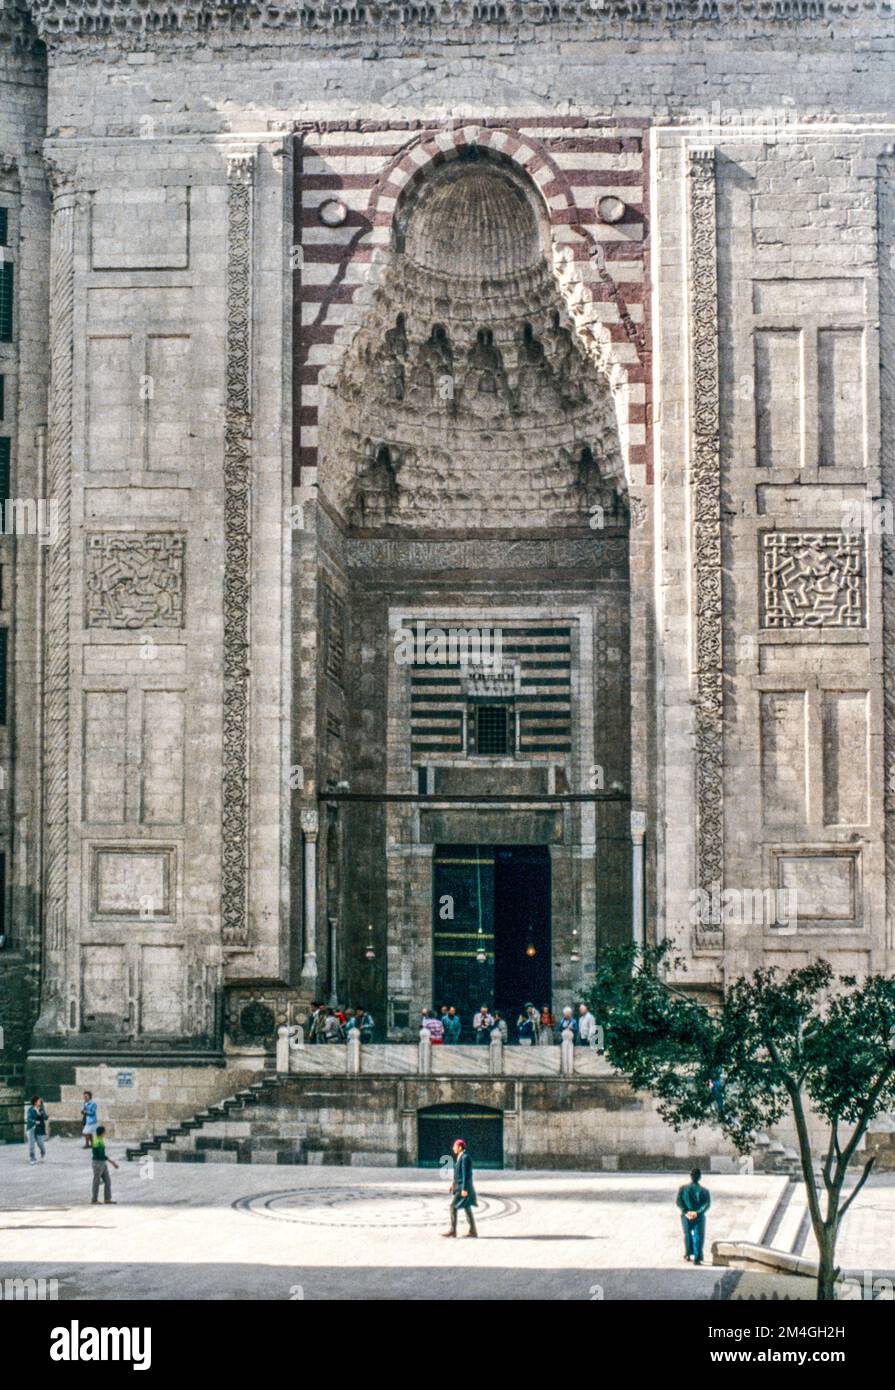 The main entrance portal to the Sultan Hassan mosque with Muqarnas (stalactite-shaped decoration) in Cairo, Egypt. Archival scan from a slide. February 1987. Stock Photo